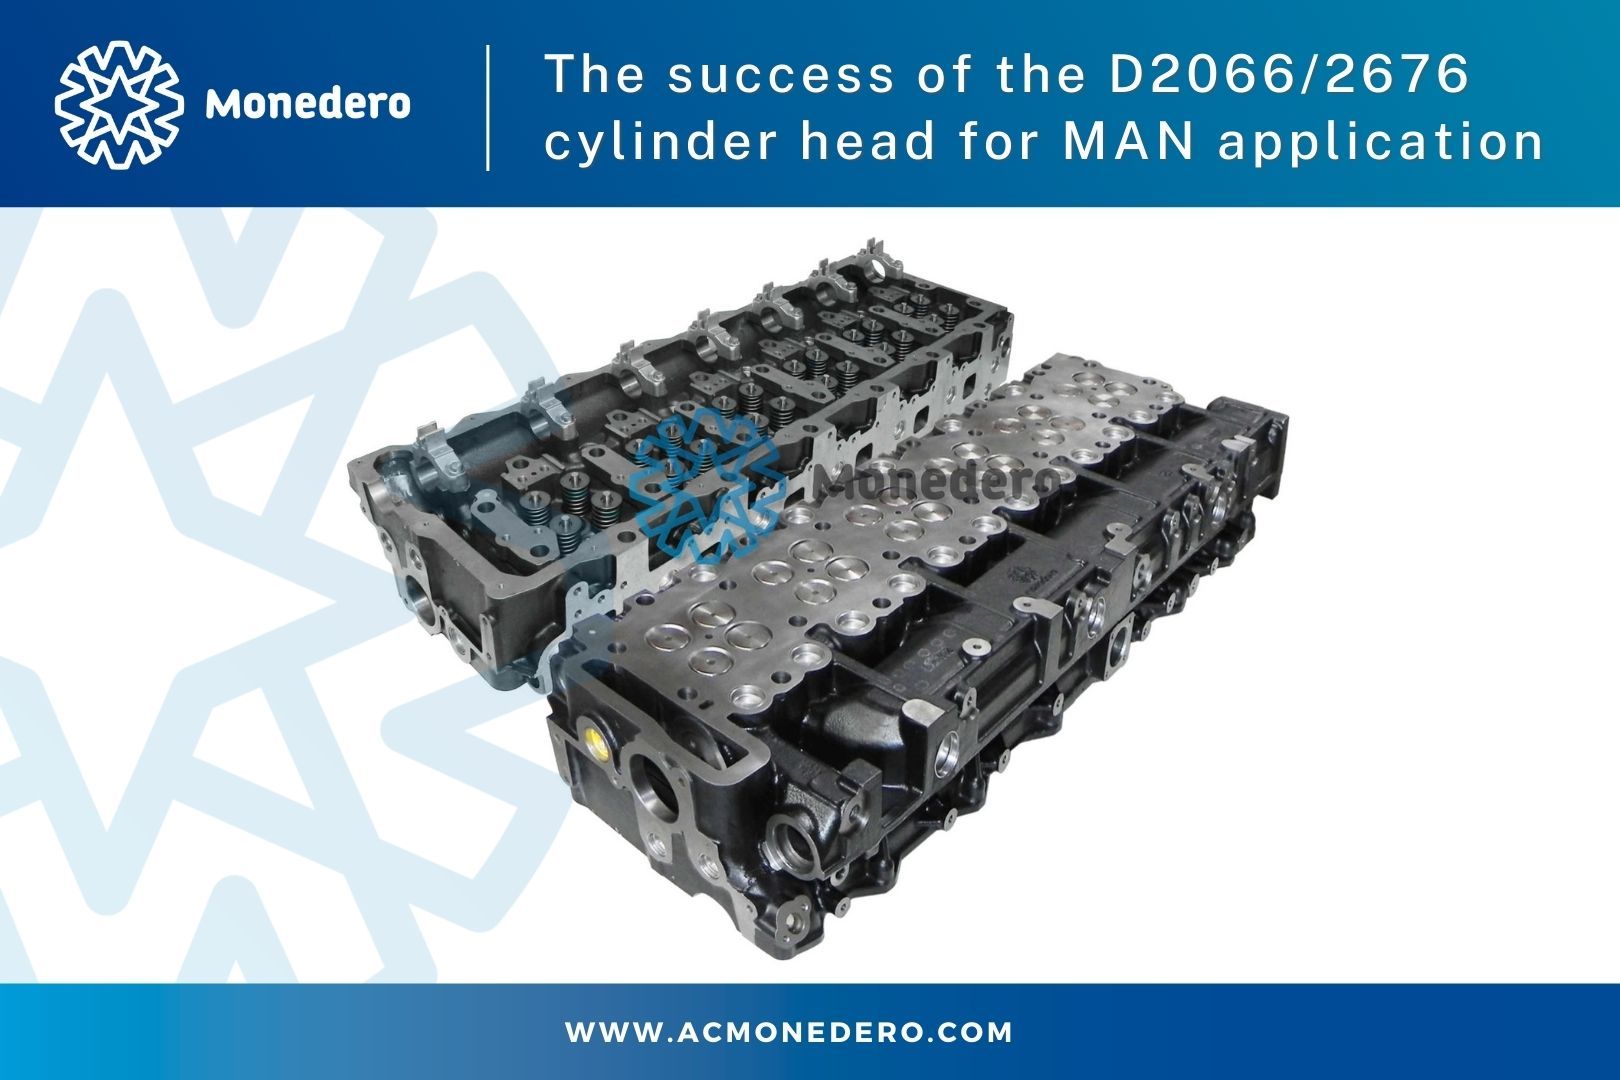 The success of the D2066/2676 cylinder head MAN application by Monedero